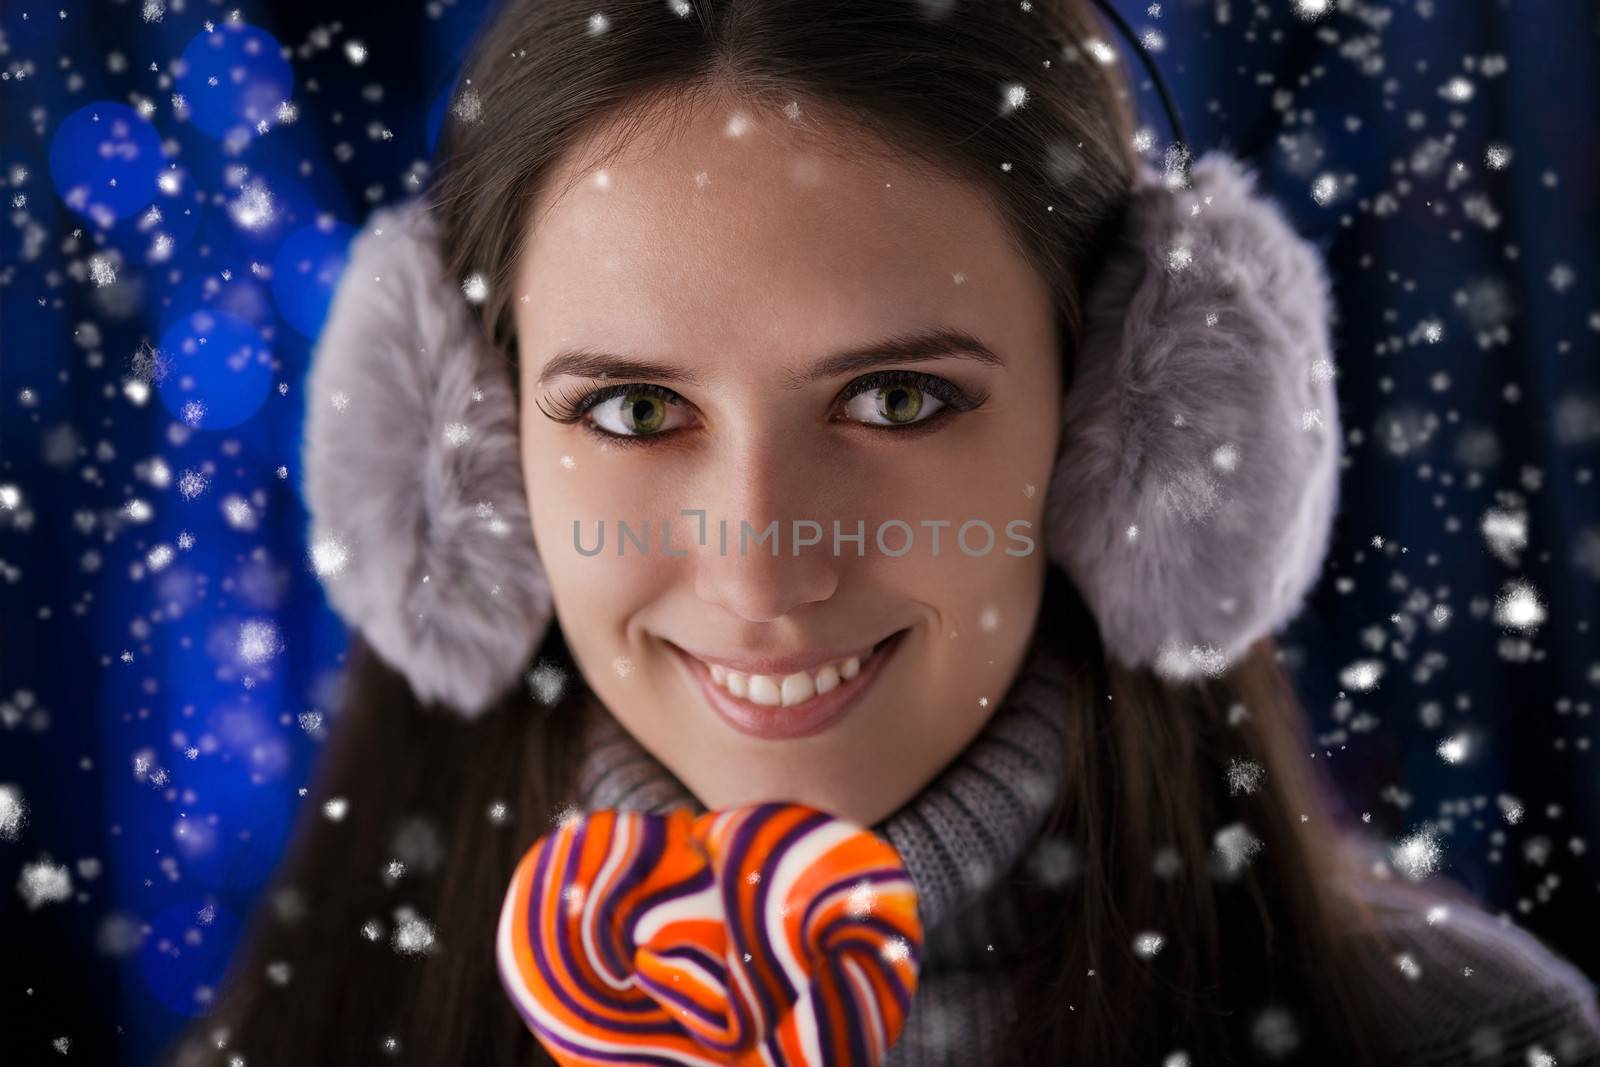 Beautiful girl holding a lollypop with snow falling around her.